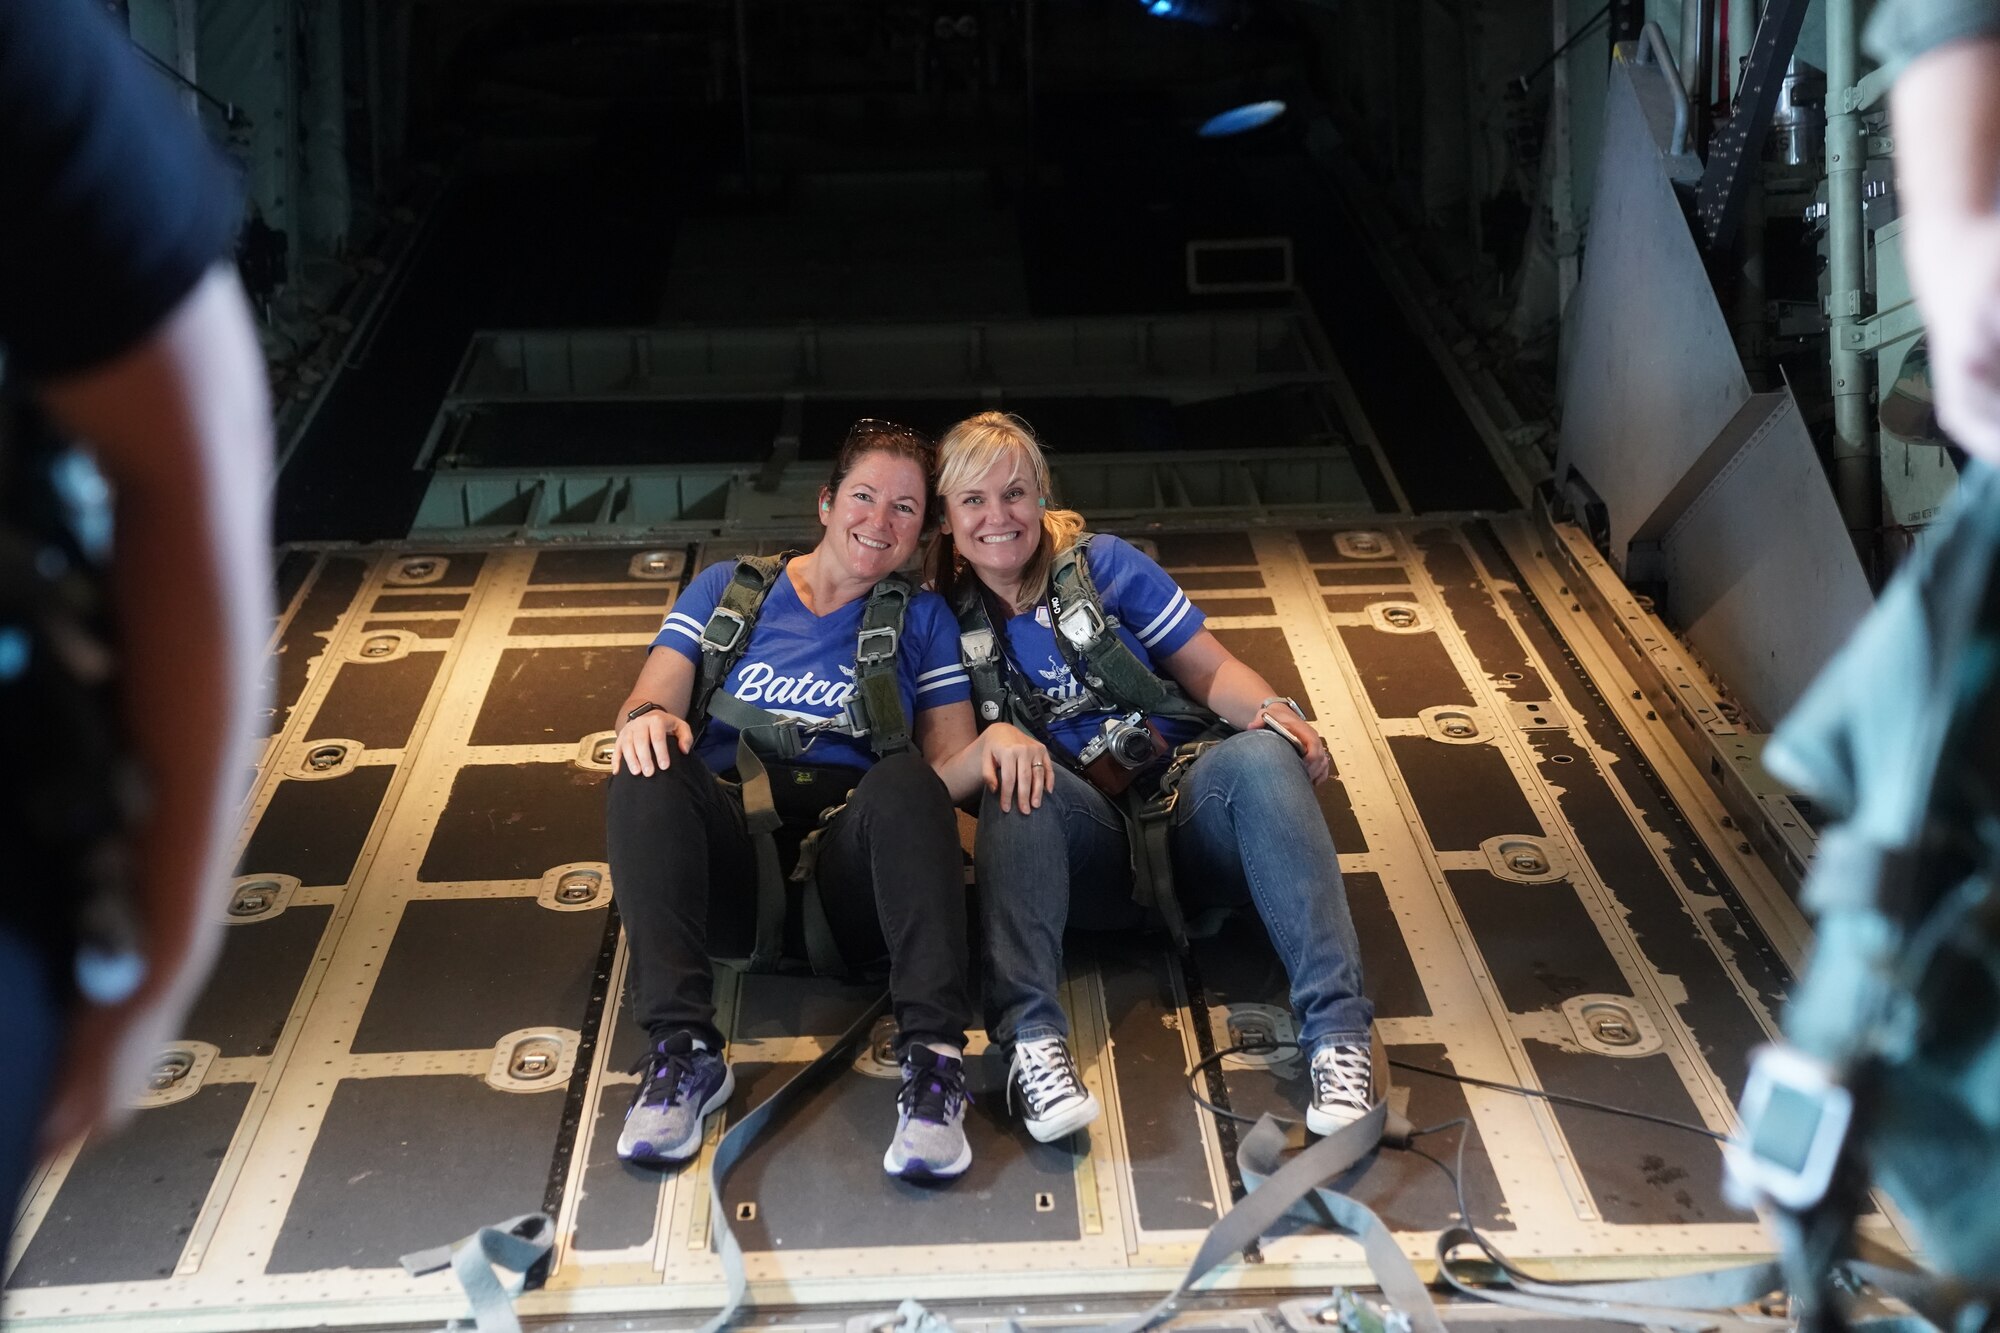 The 353rd Special Operations Group spouses and families were invited to spend the day at work with their Airmen on 27 September, 2019.